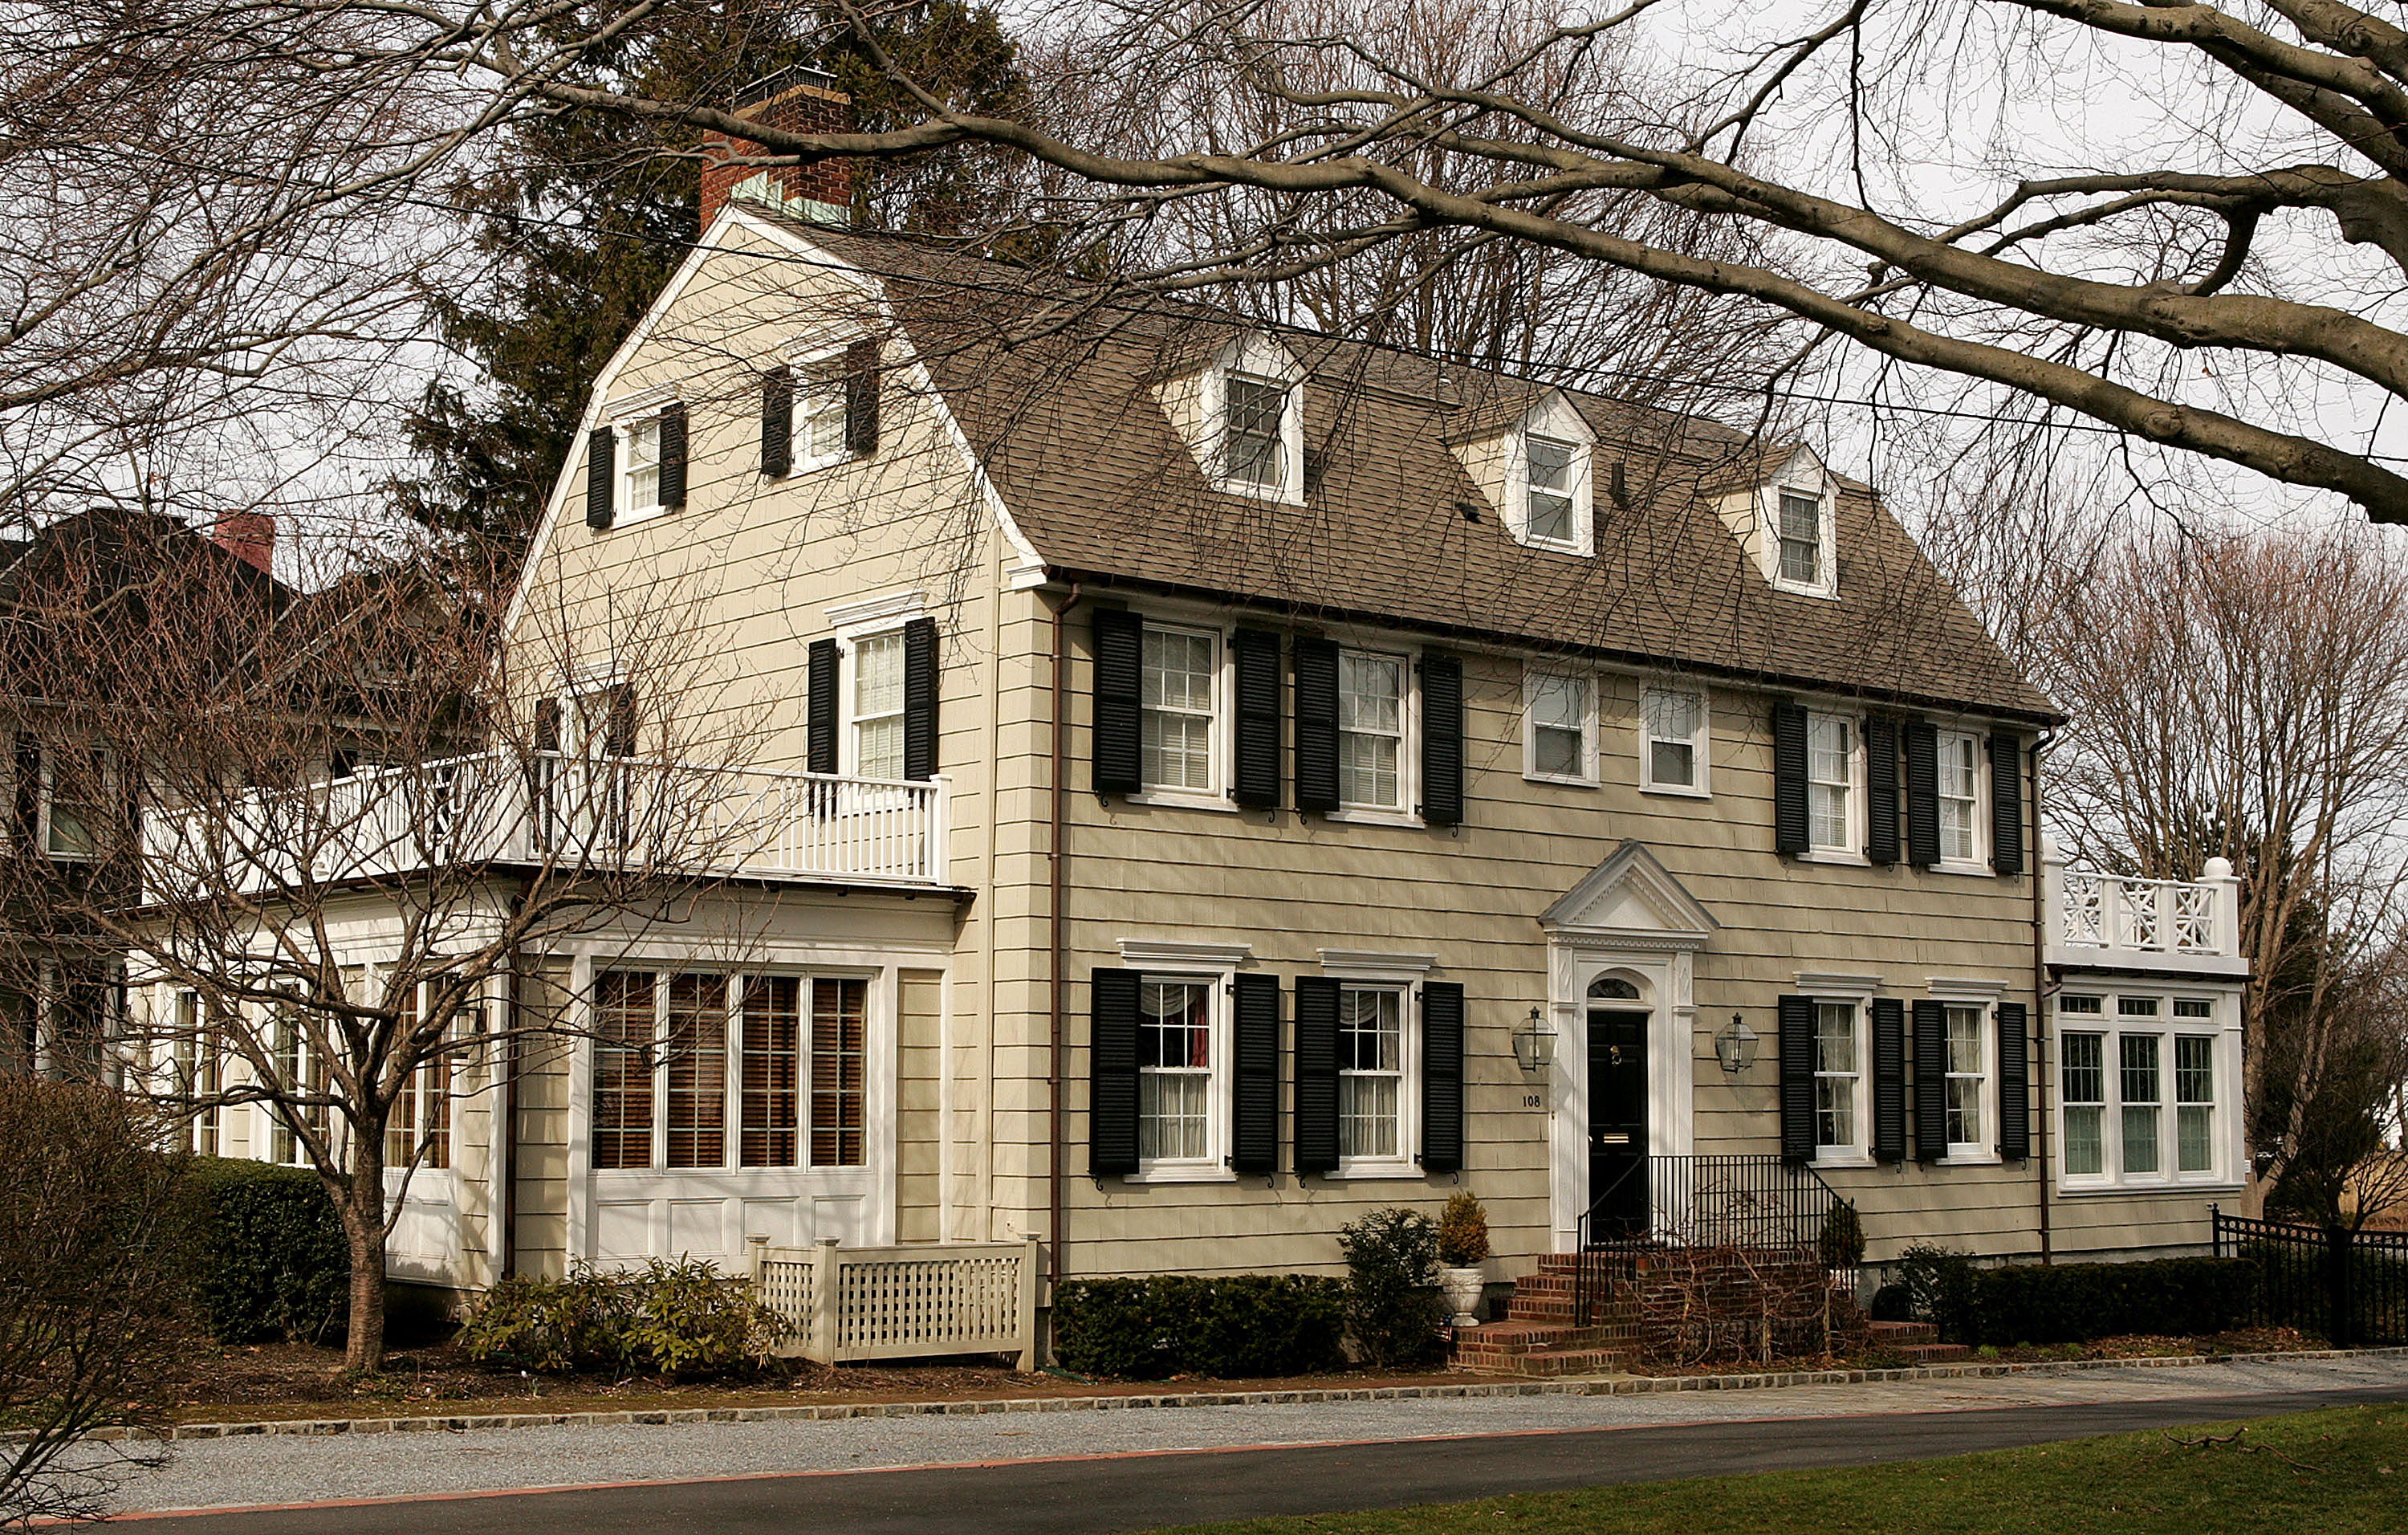 The Watcher home had eerie similarities to the infamy of another Dutch colonial just 60 miles east - the Amityville Horror House on Long Island, which also sparked international interest for its creepy story